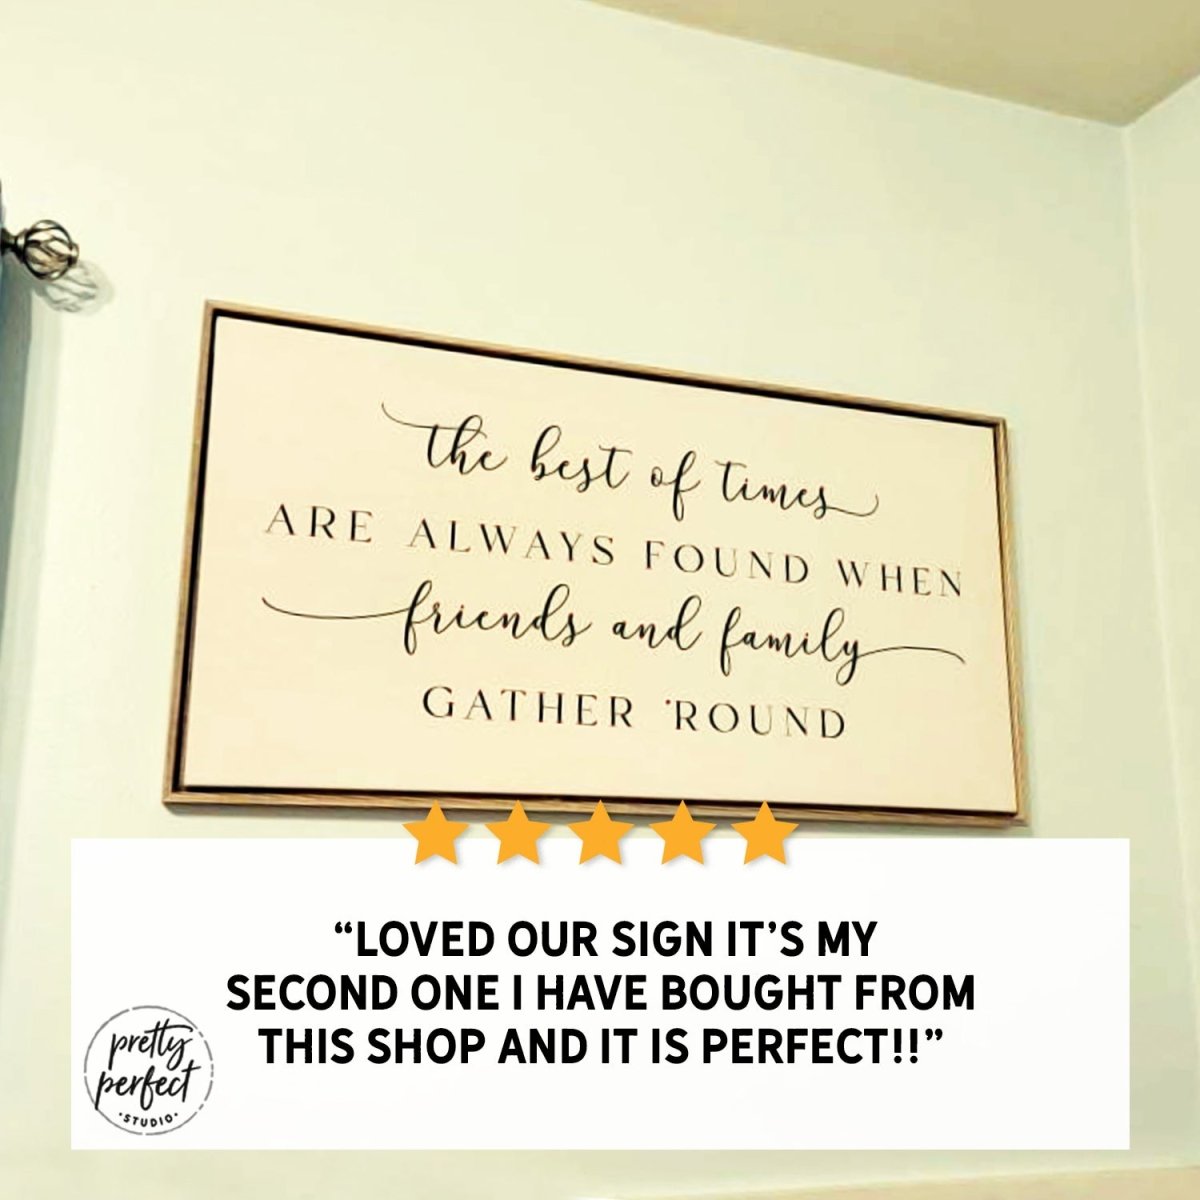 Customer product review for the best of times sign by Pretty Perfect Studio